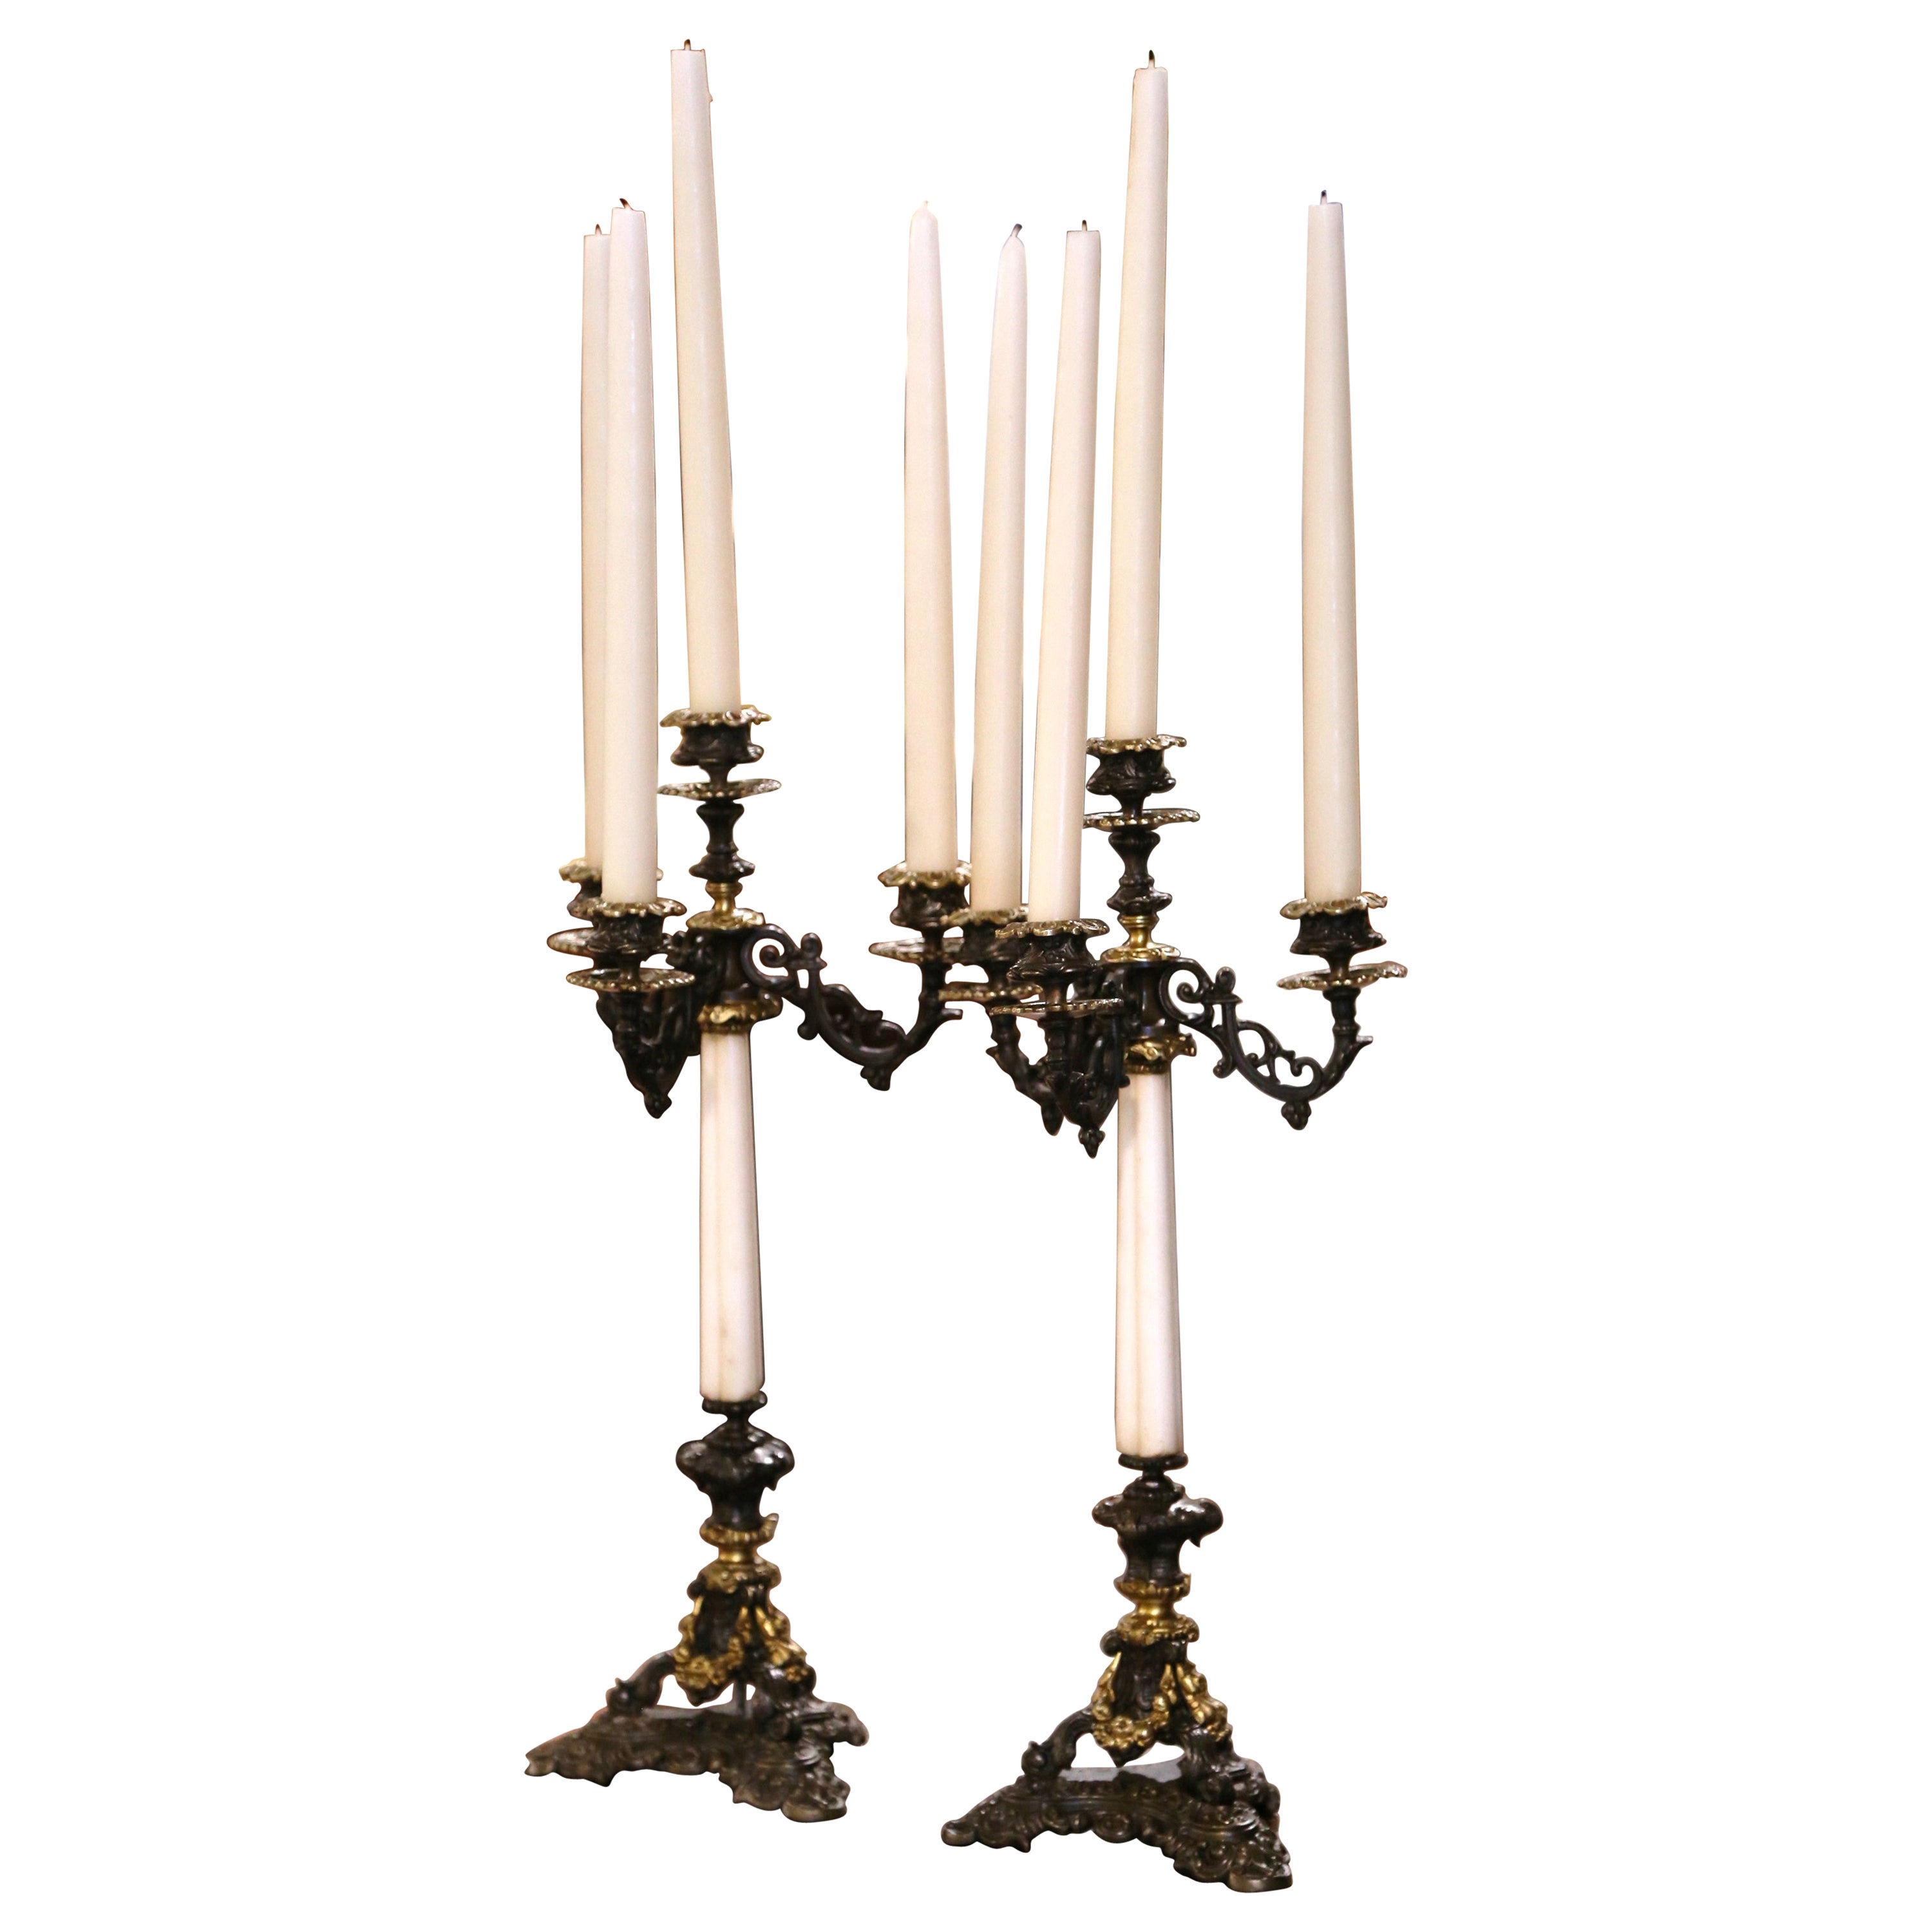 Pair of 19th Century French Napoleon III Bronze and Marble Candlesticks